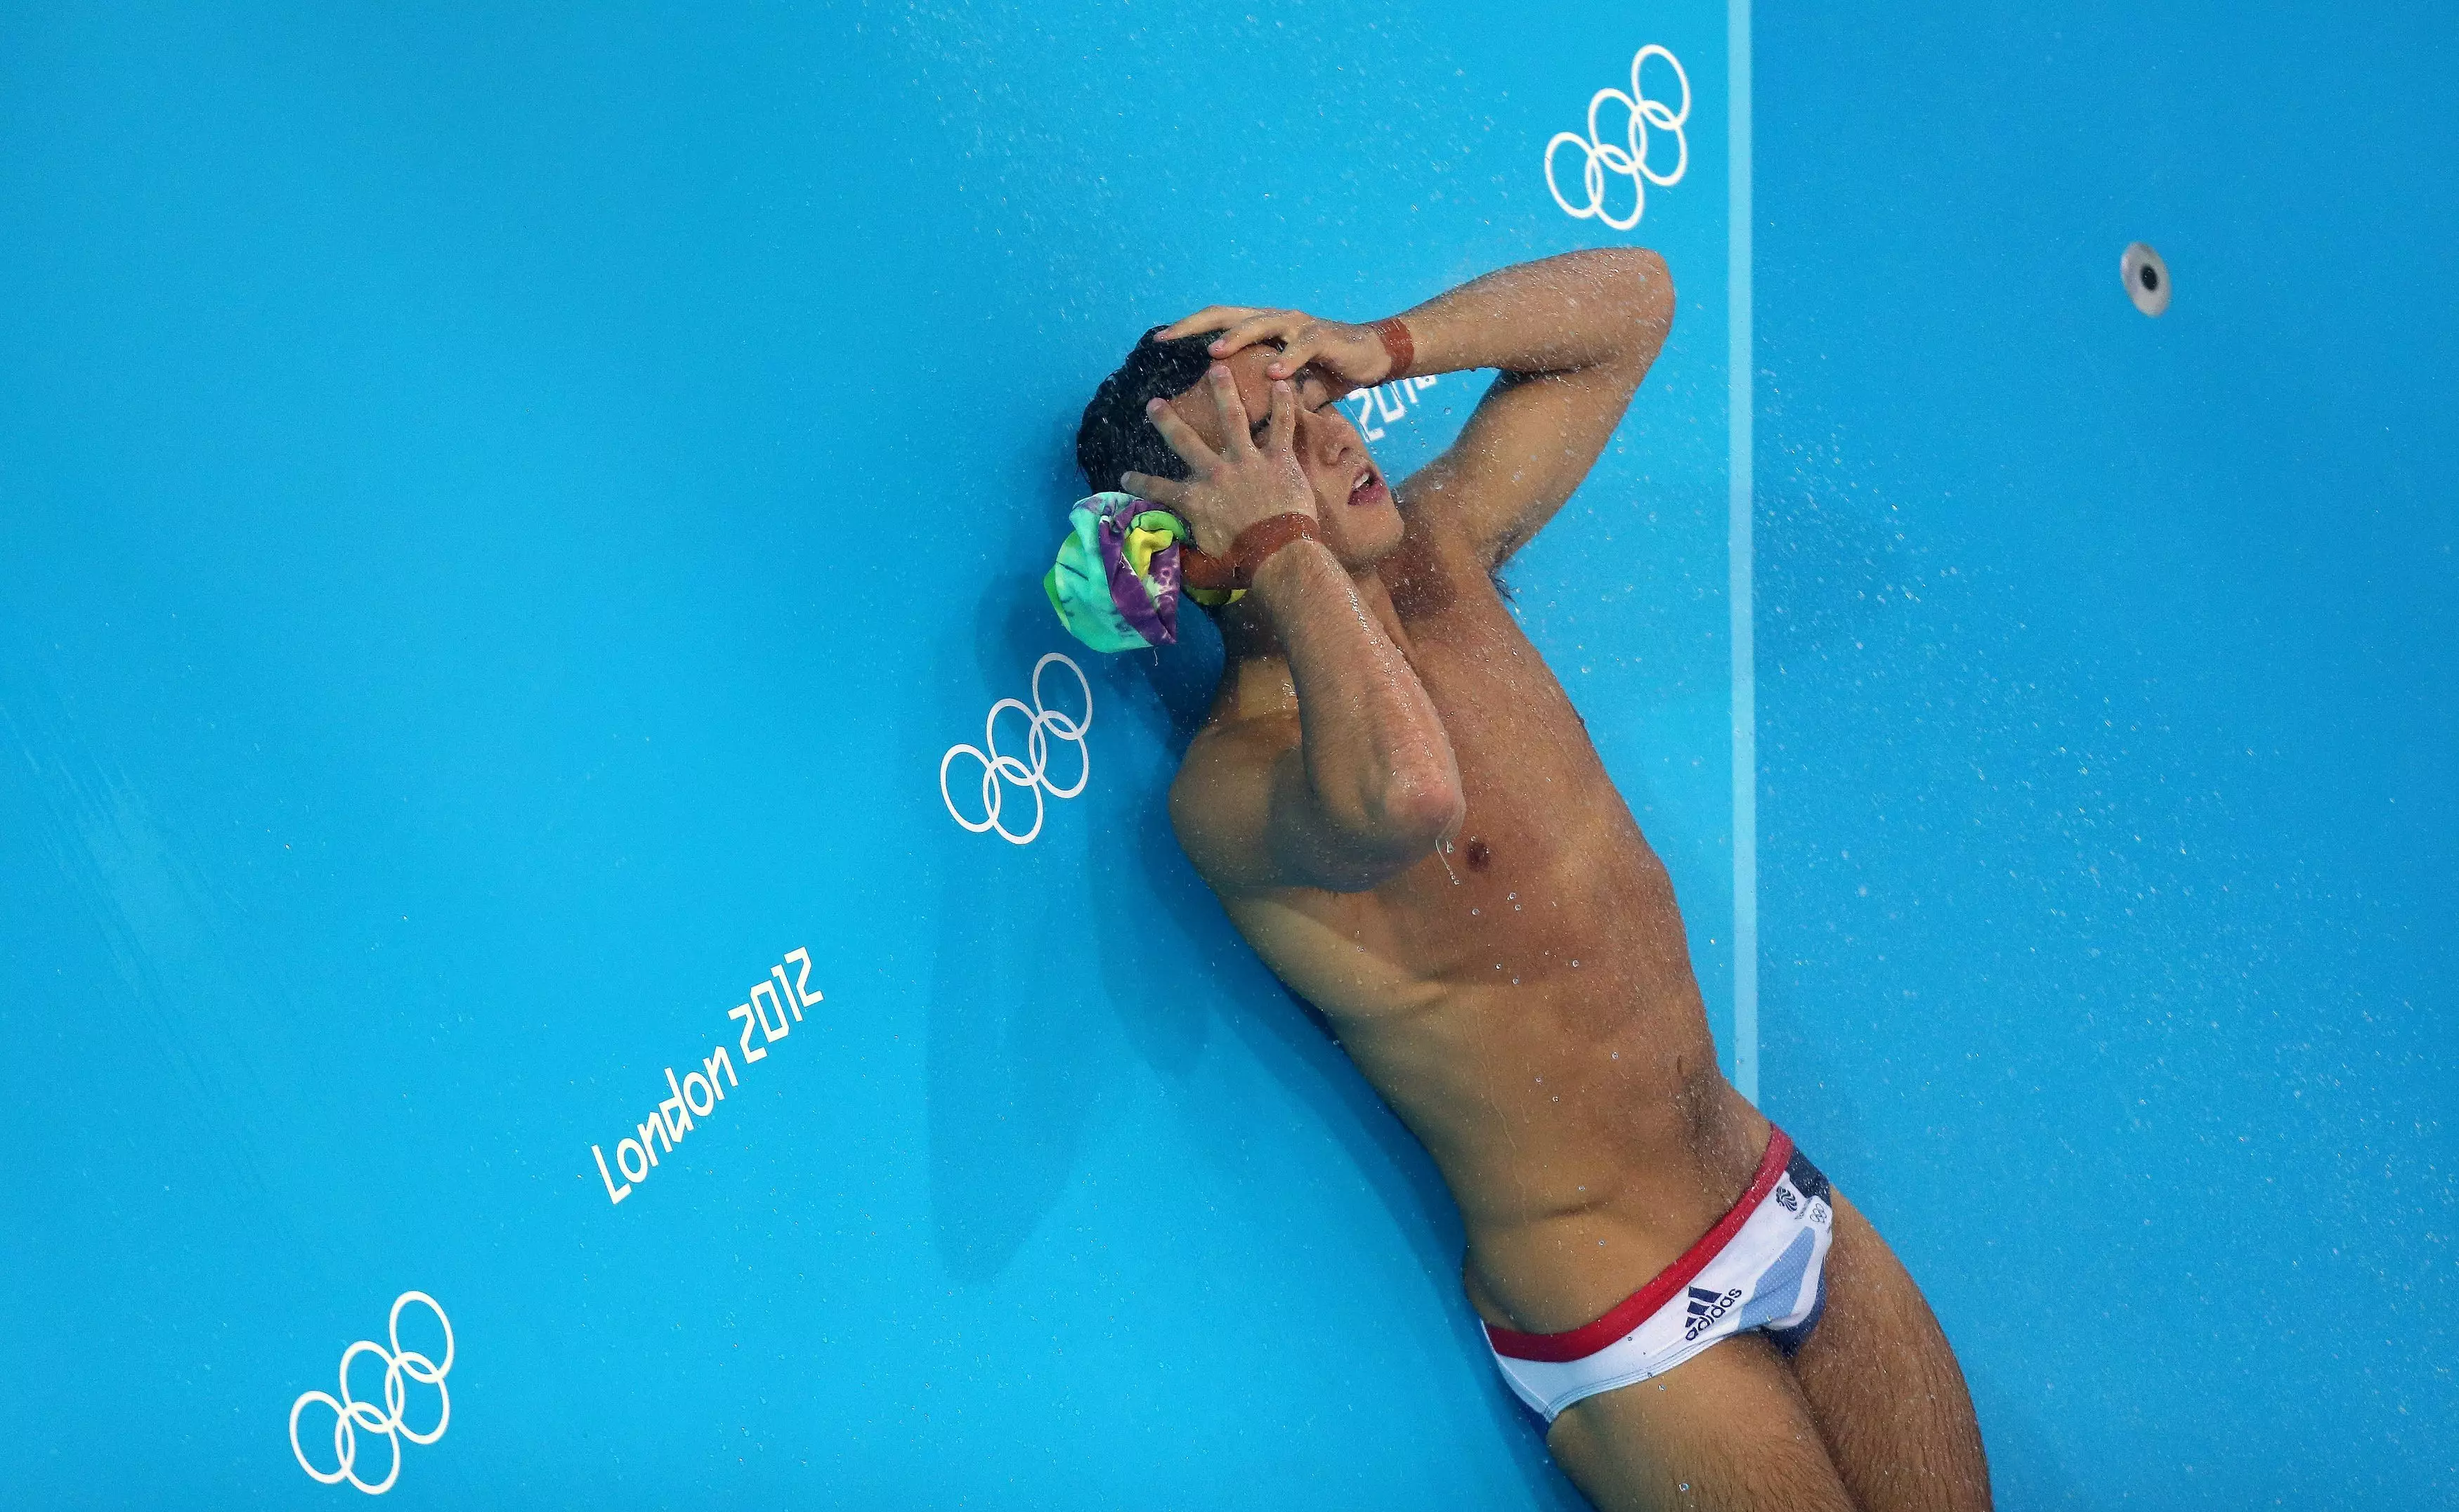 Tom Daley at the 2012 Olympics.